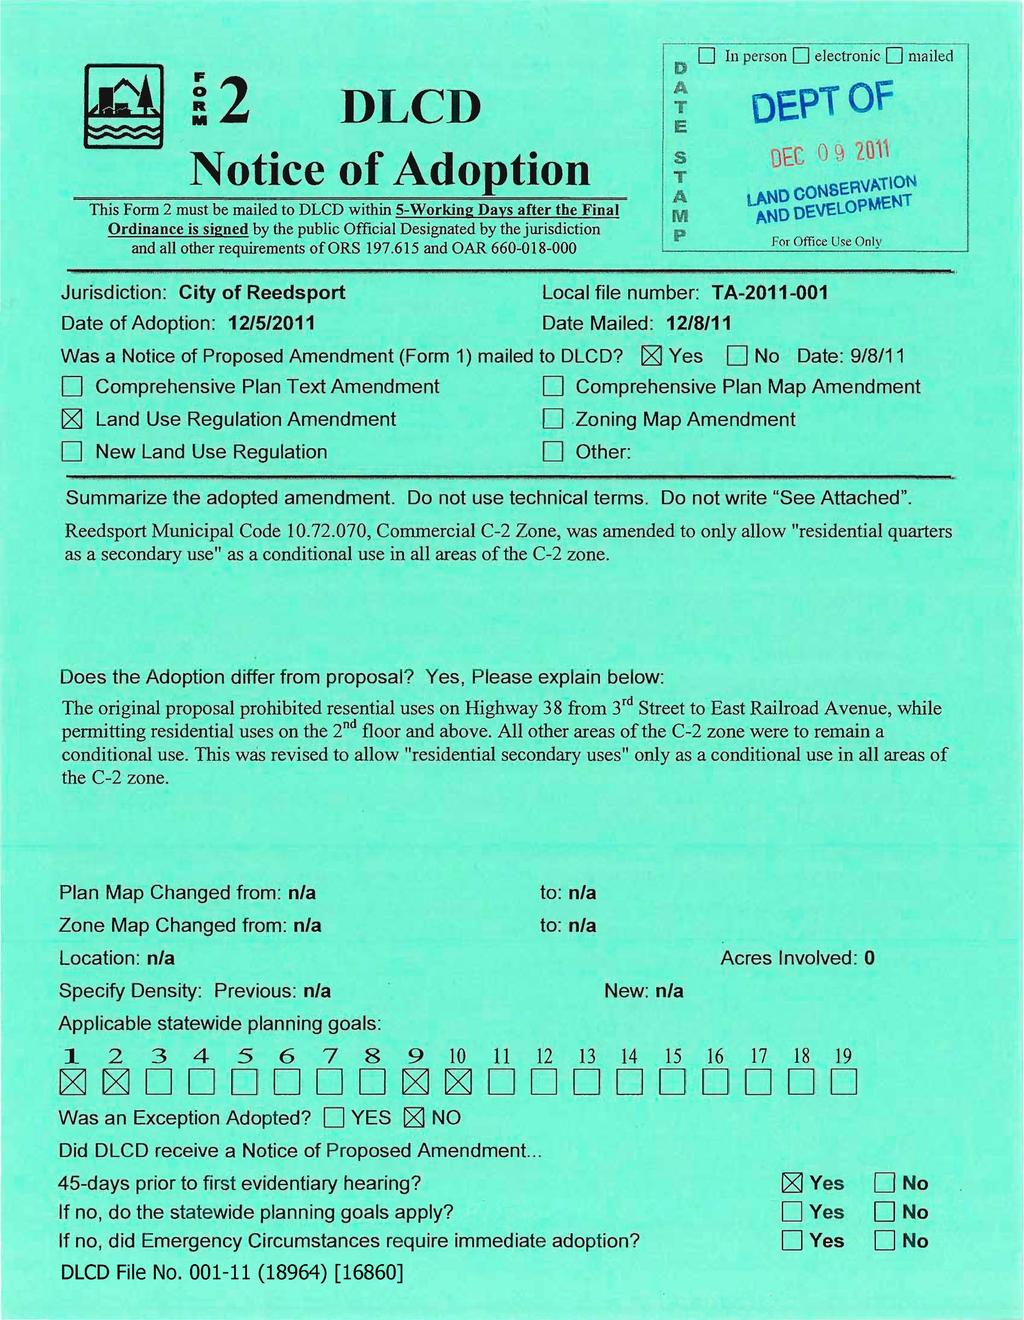 Iii H 2 O DLCD Iii person Q electronic Q mailed OEPT OF T Notice of Adoption DEC o 12011 T HESSSS?